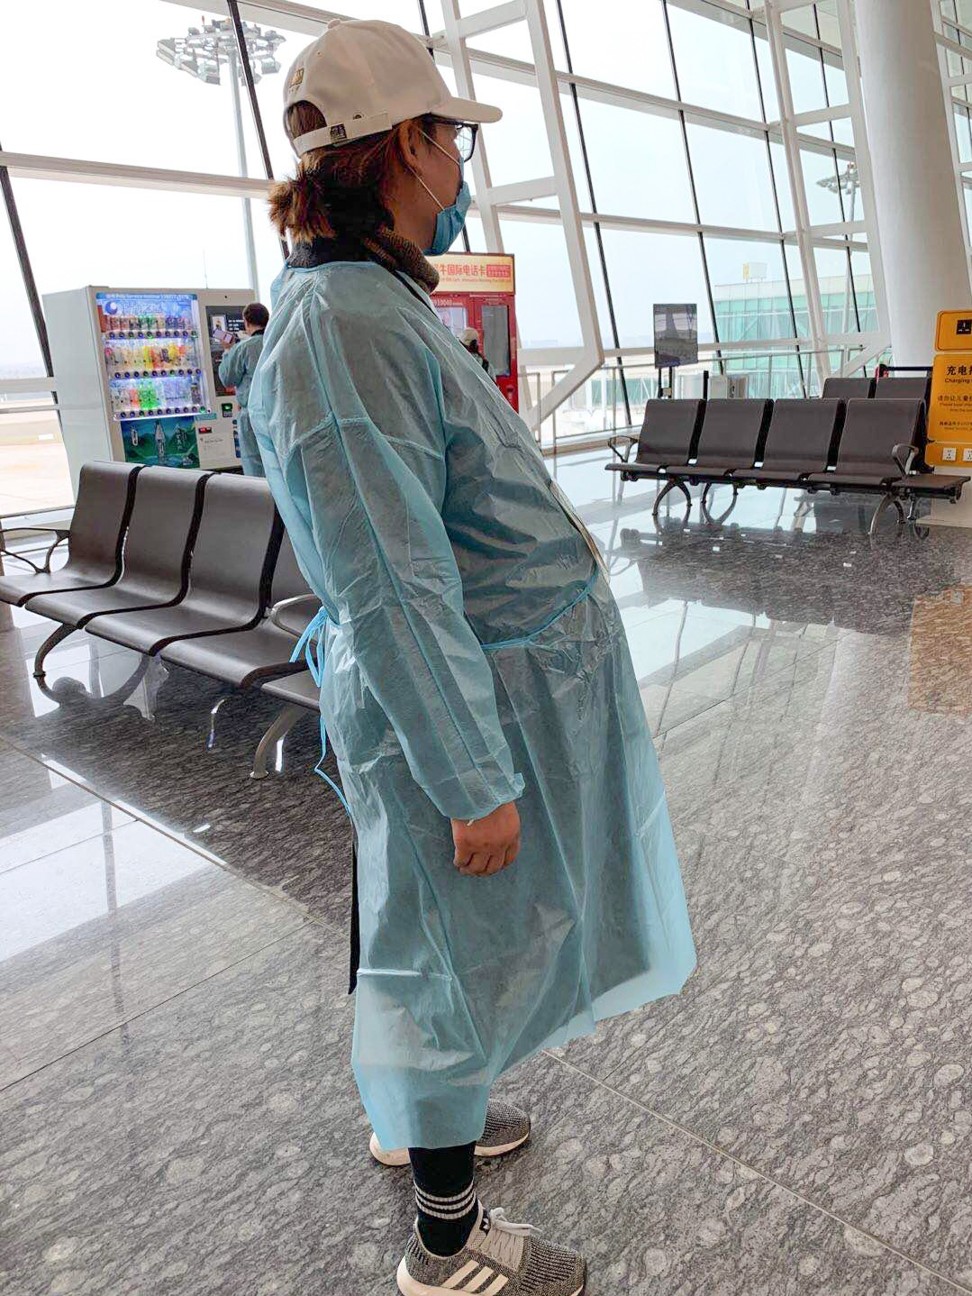 A woman in her 36th week of pregnancy was among the evacuees from Wuhan on Wednesday. Photo: Handout